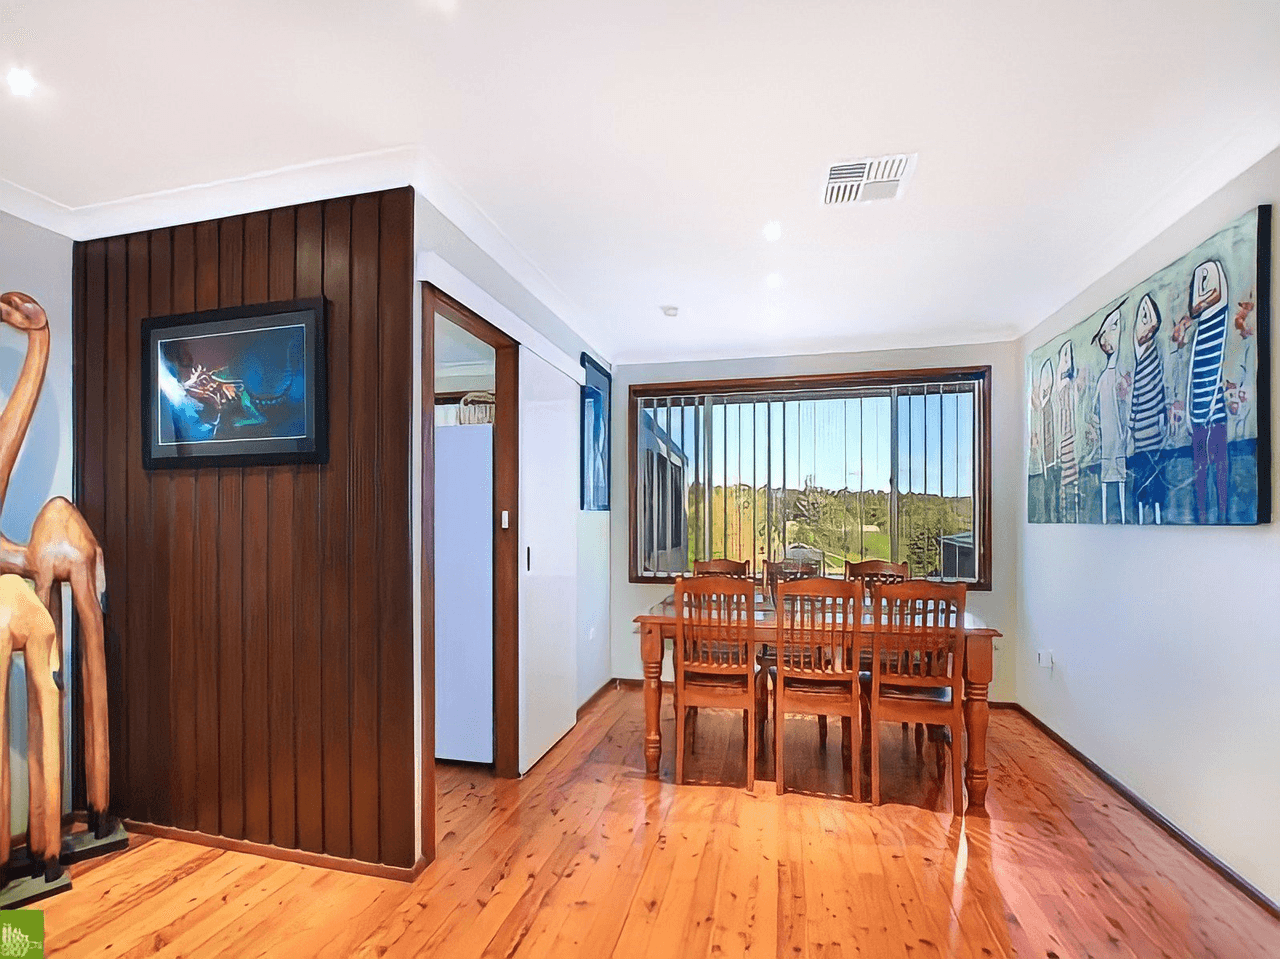 77 O'Donnell Drive, FIGTREE, NSW 2525